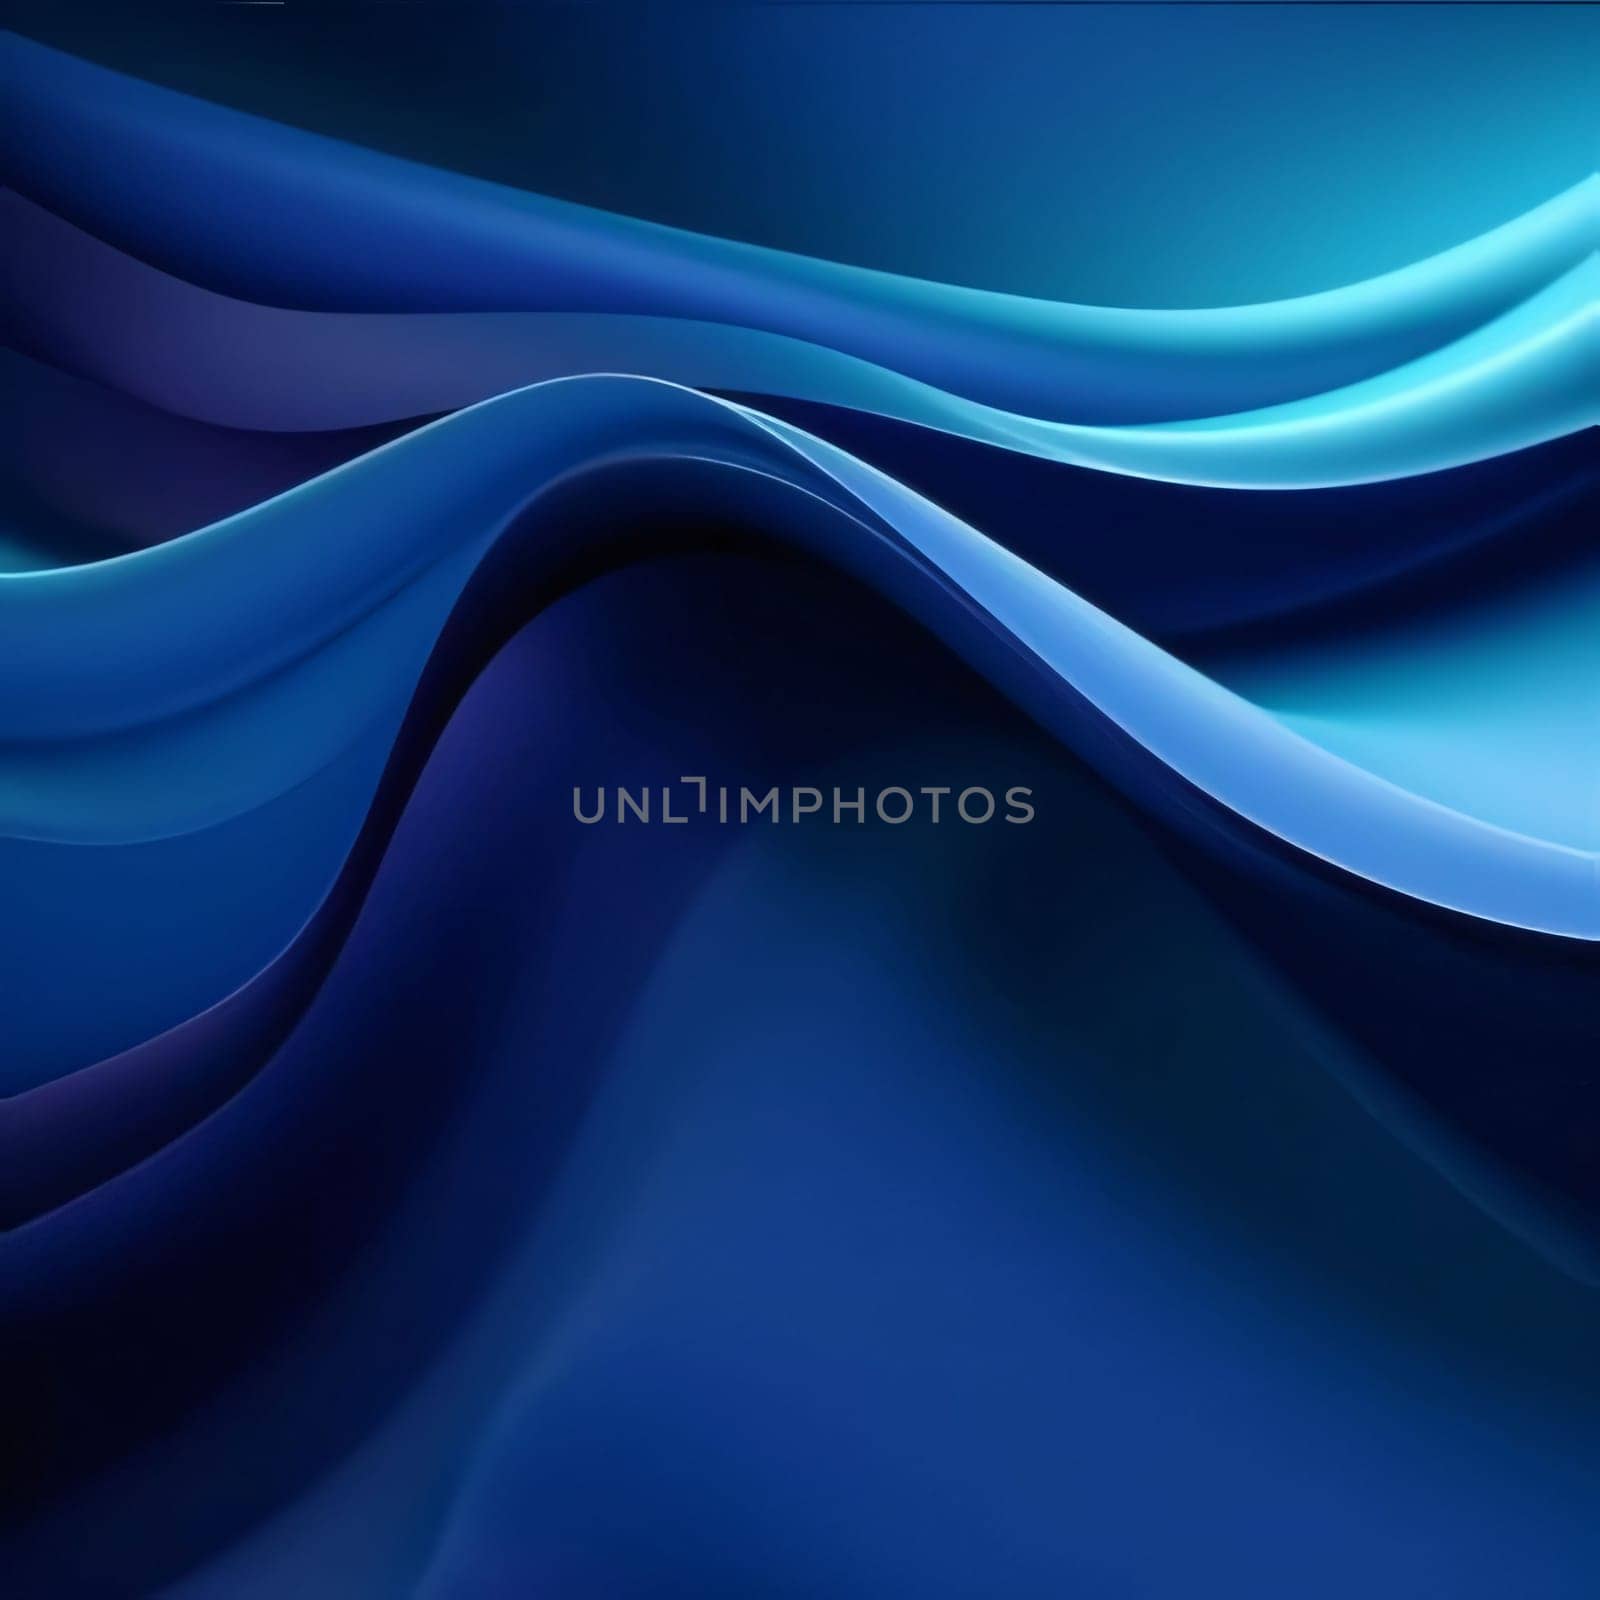 Abstract blue background with smooth lines. Vector illustration. Eps 10. by ThemesS